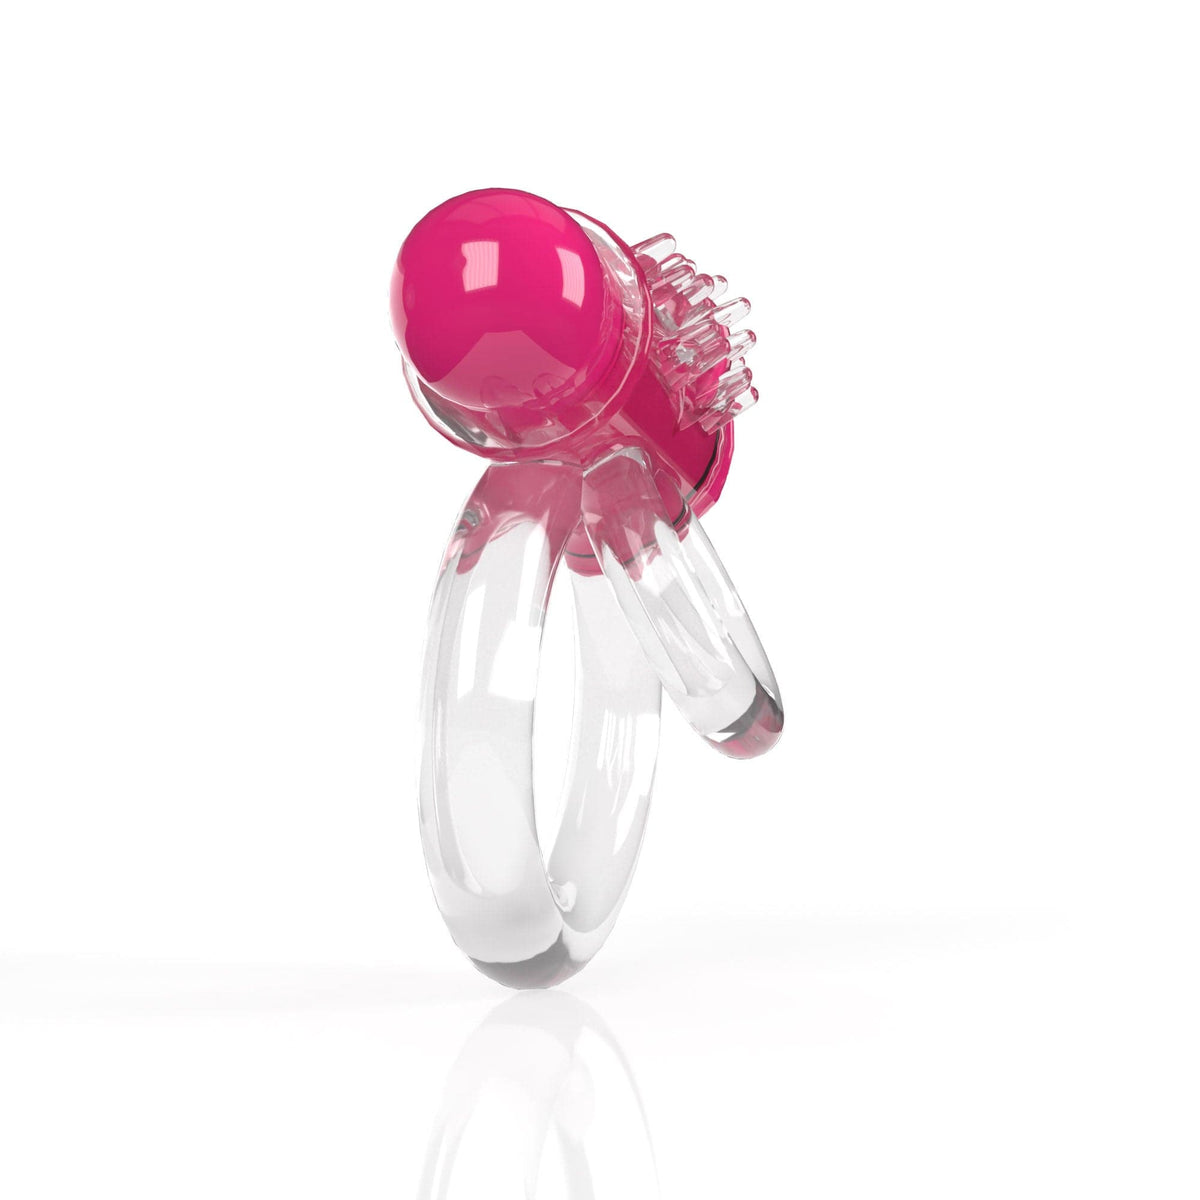 screaming o 4t double o 6 super powered vibrating double ring strawberry